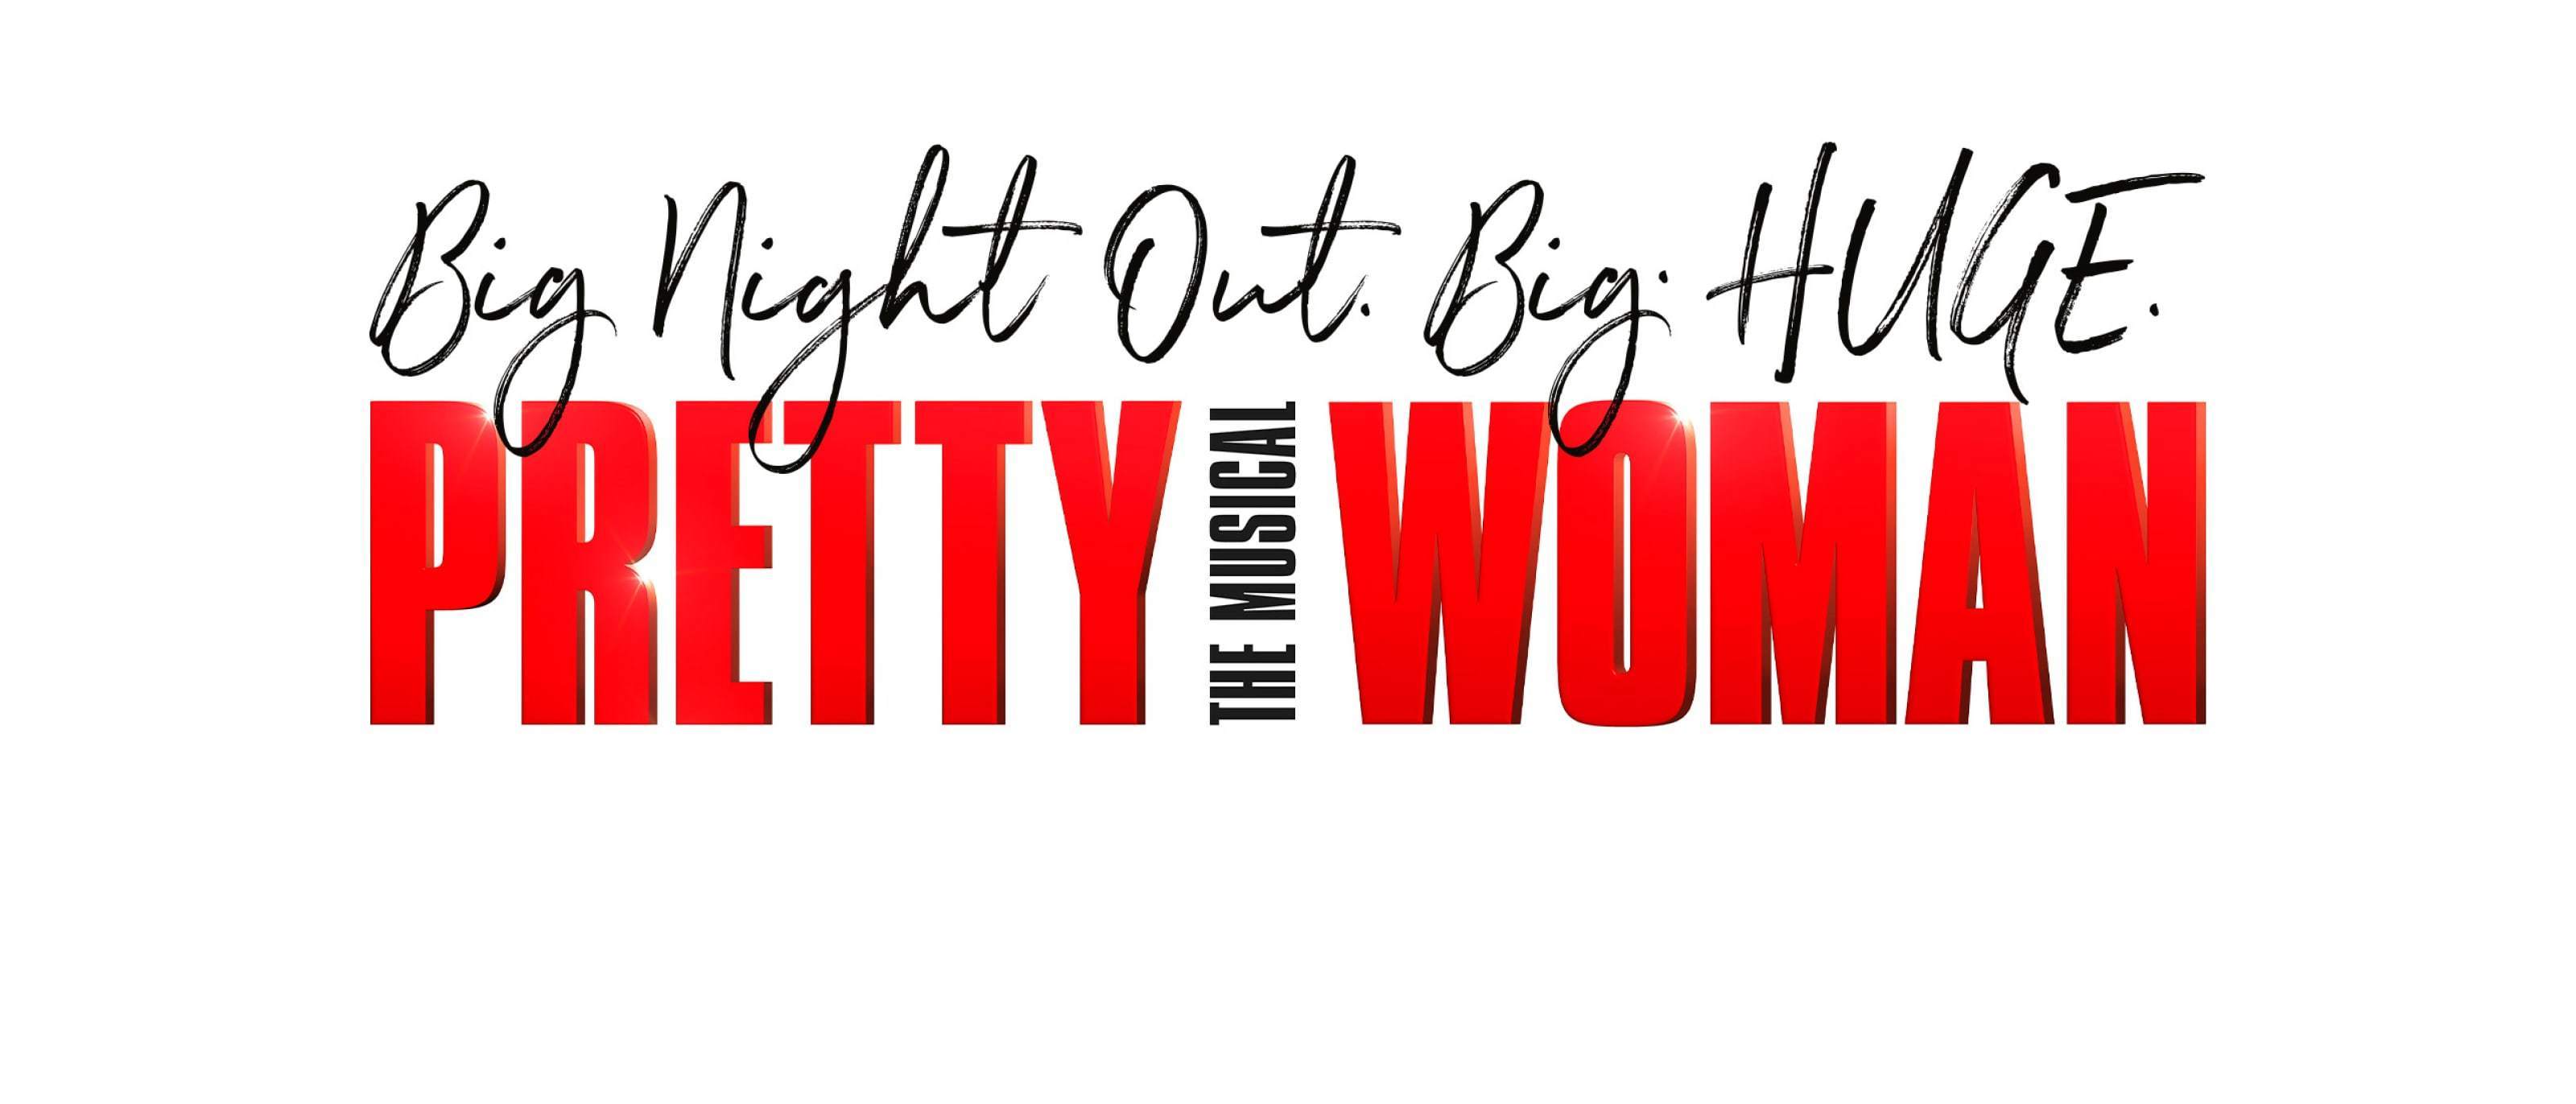 Buy tickets for Pretty Woman the Musical